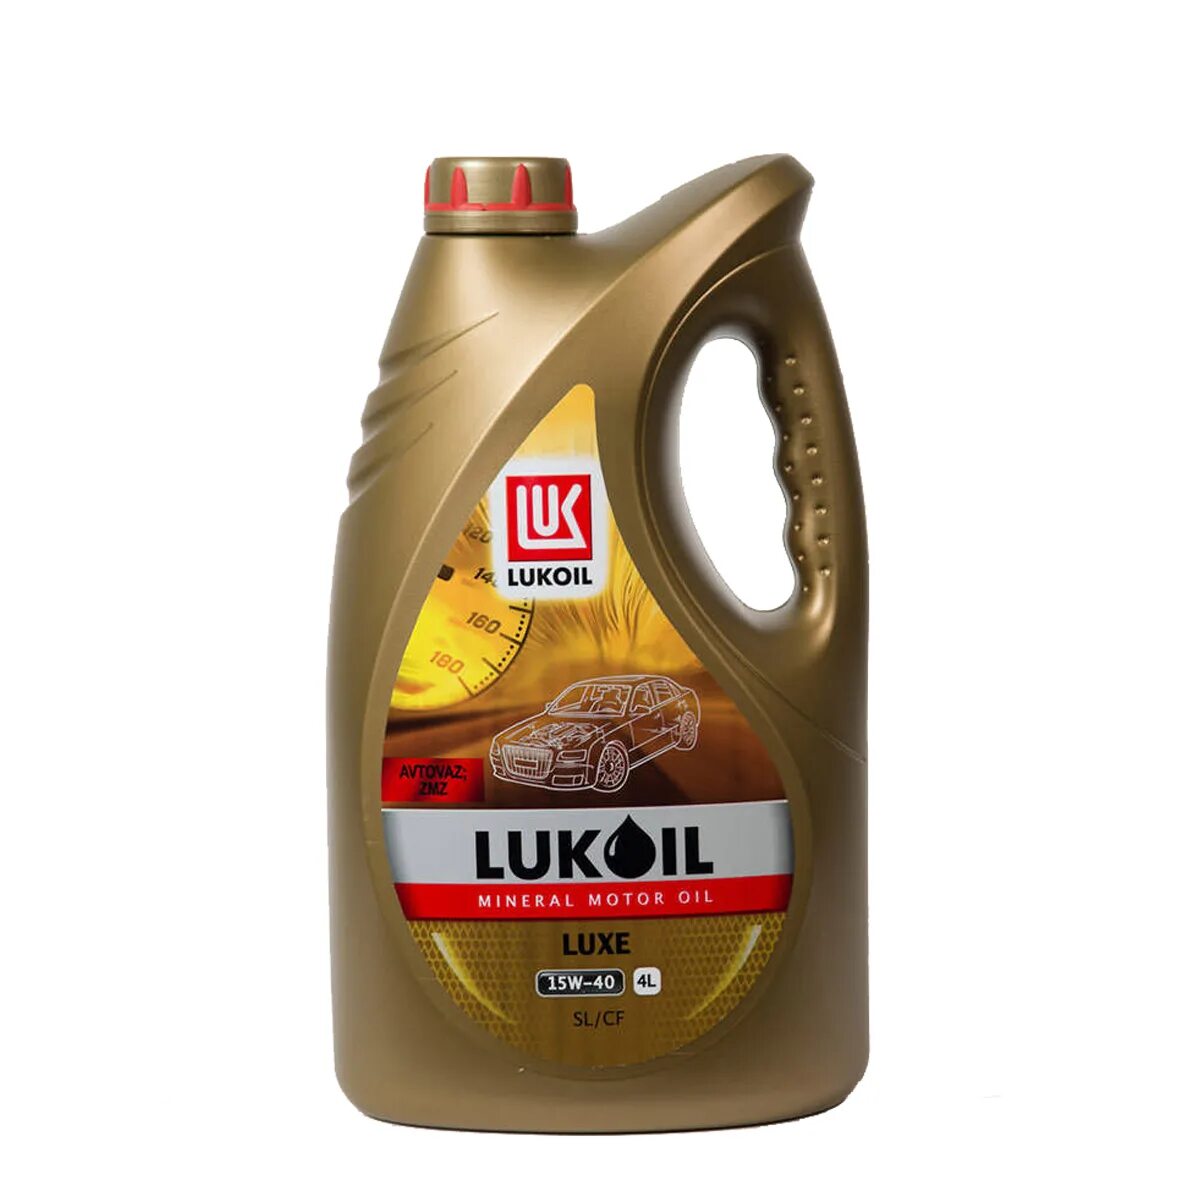 Lukoil Luxe 15w-40. Лукойл Люкс 10w30. Lukoil. Sae15w40. Масло Luxe 15w40 минеральное. Масло лукойл 0w40